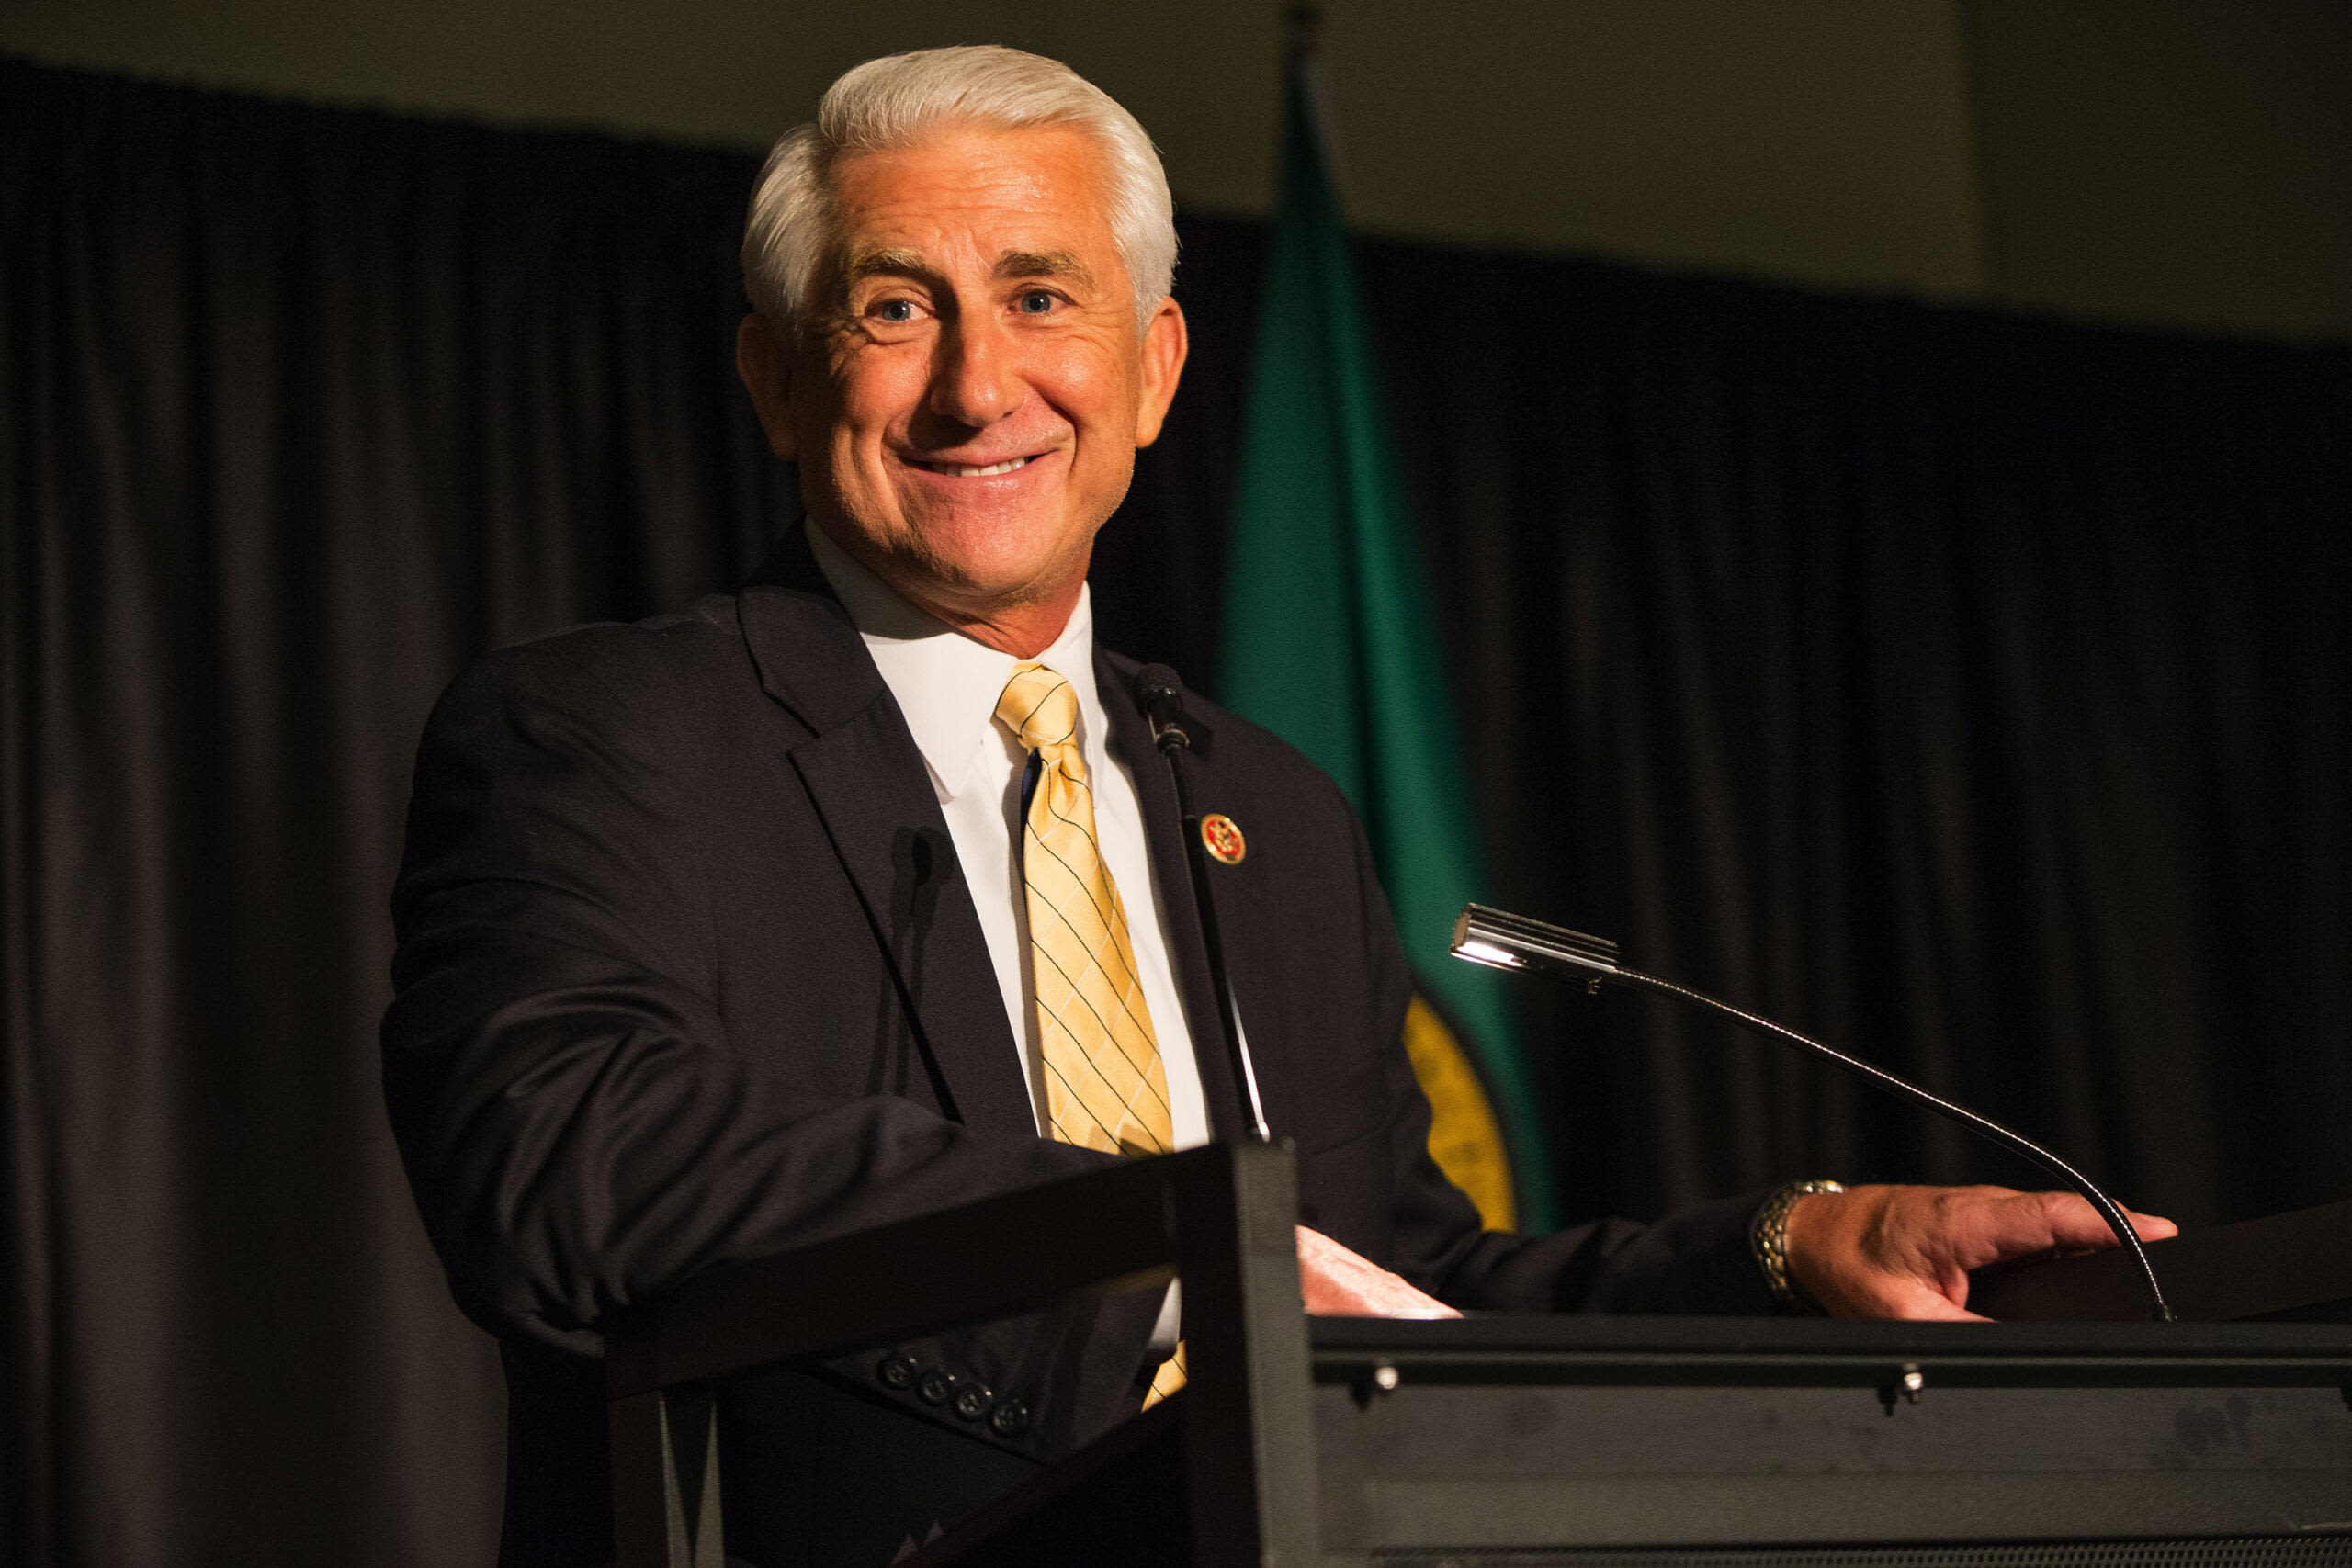 Reichert files for governor, another Republican enters congressional race, and more